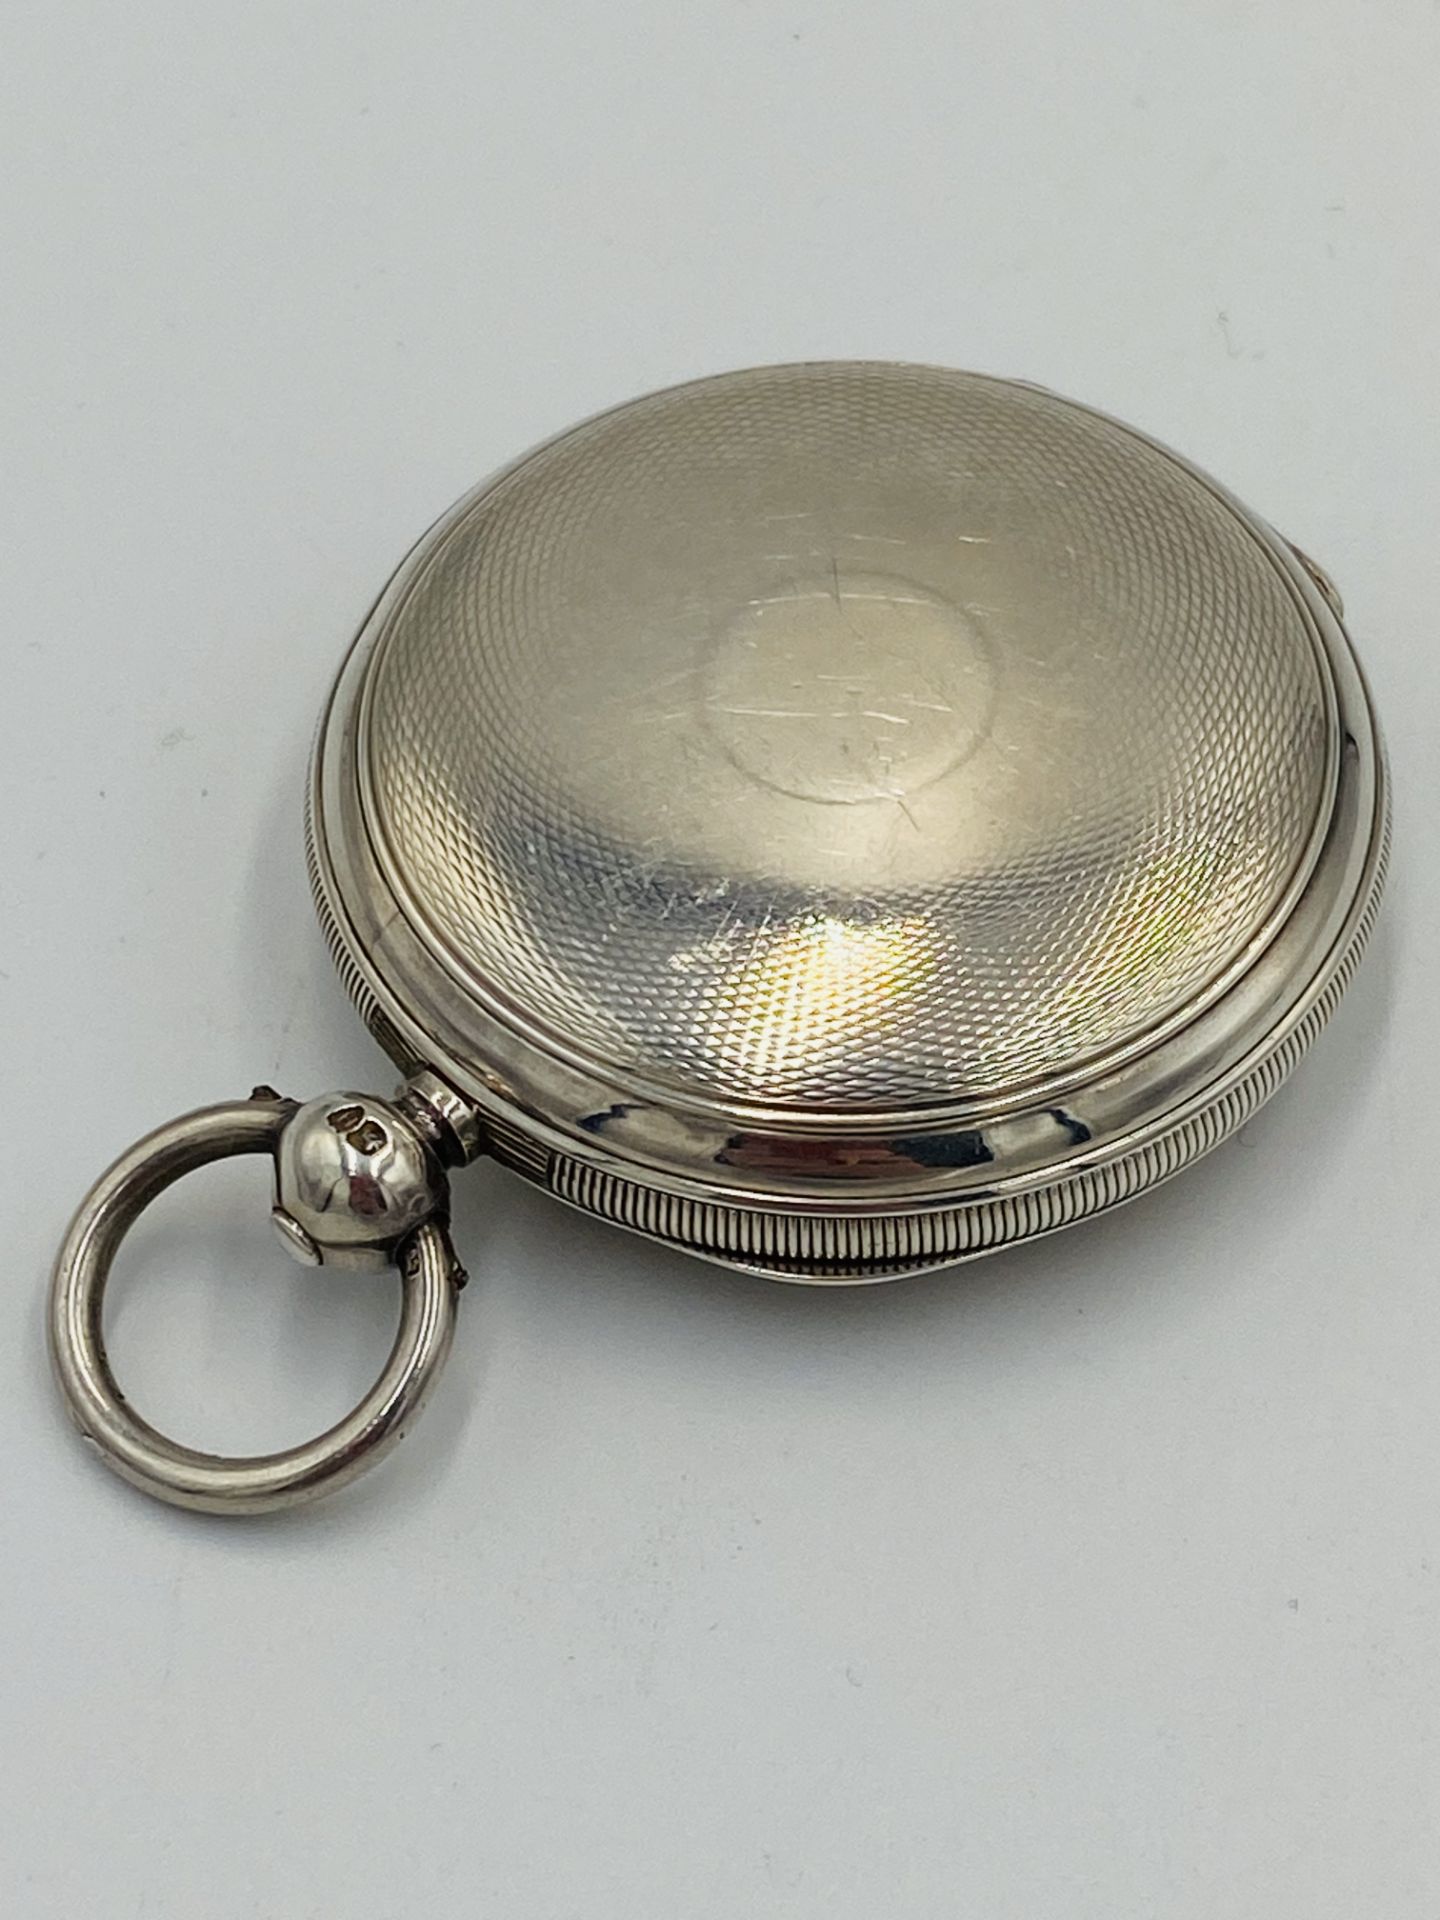 Victorian silver pocket watch together with a silver fob chain - Image 3 of 7